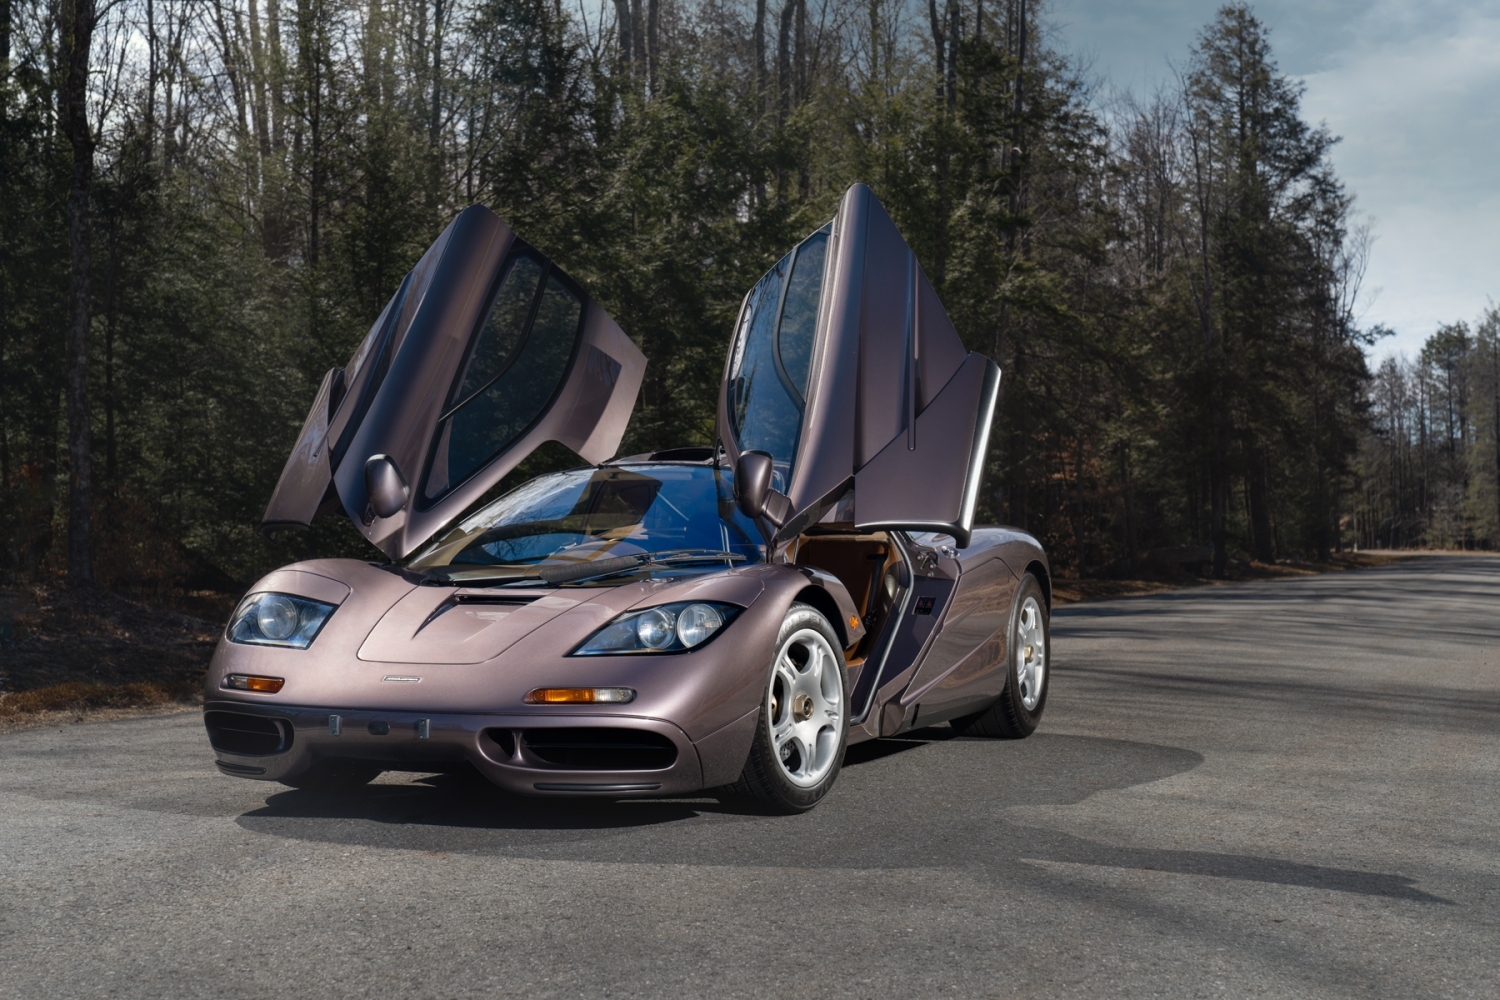 McLaren F1 Road Car Sets Record Price at Auction